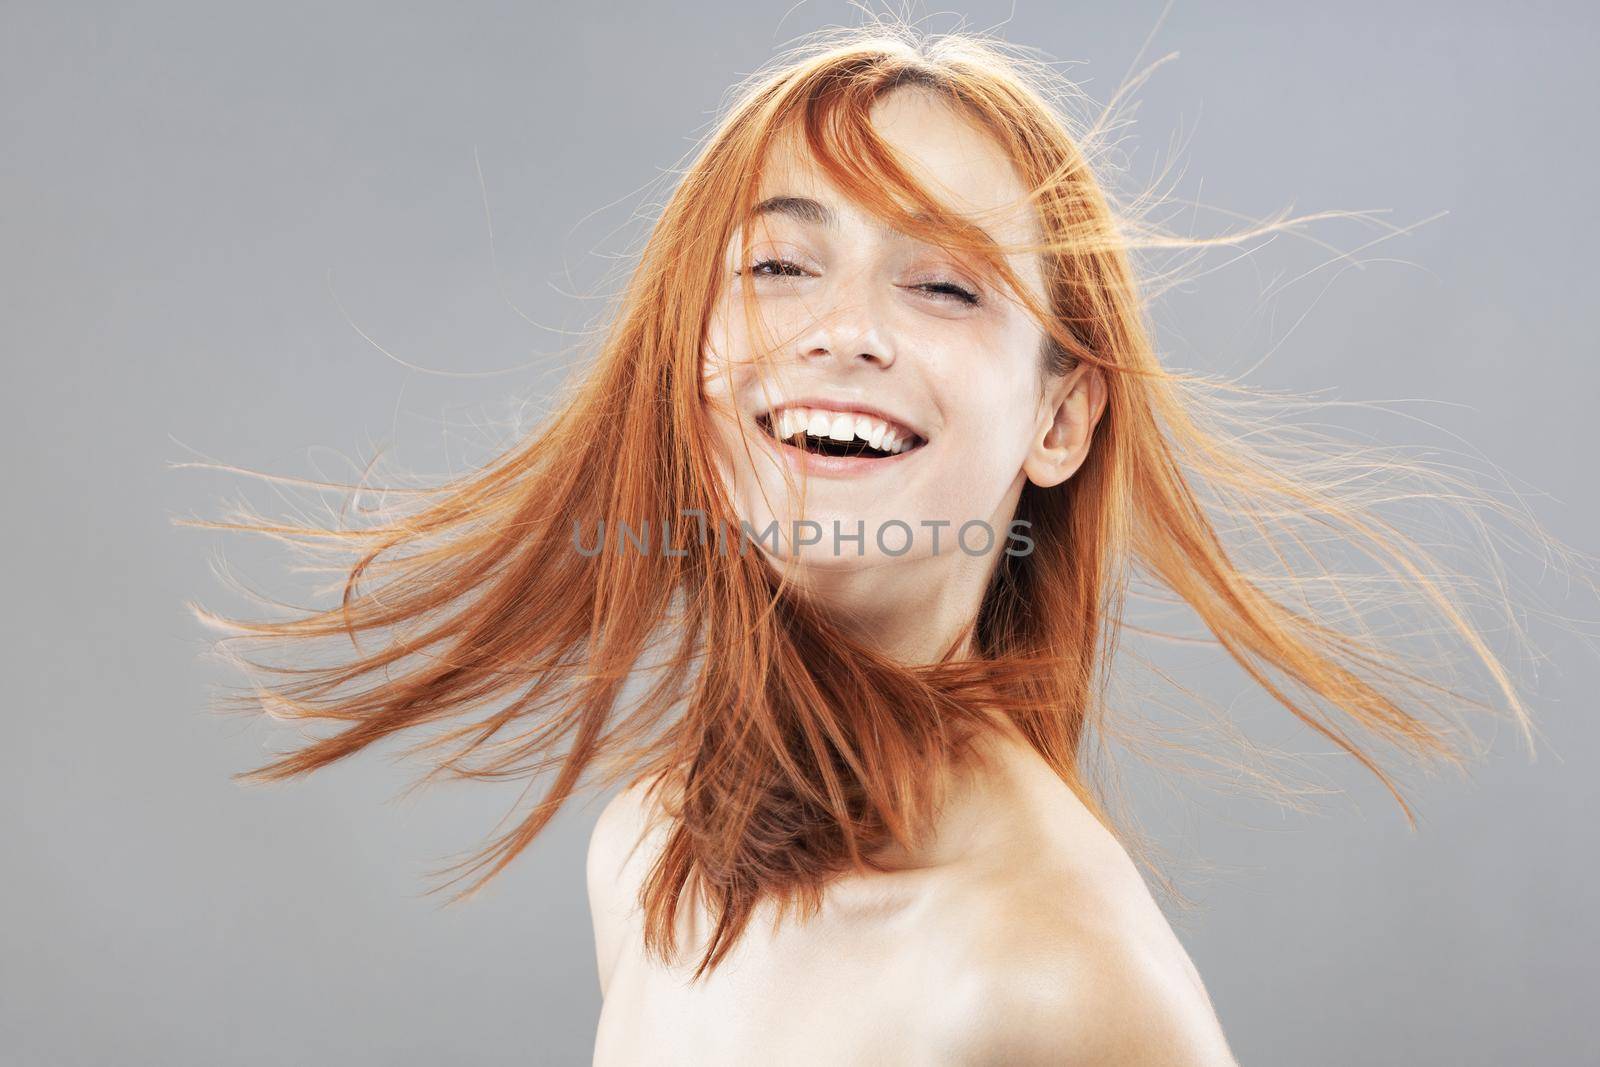 Beautiful dark burnt orange windy hair girl smiling. Studio portrait with happy face expression against gray background... by kokimk